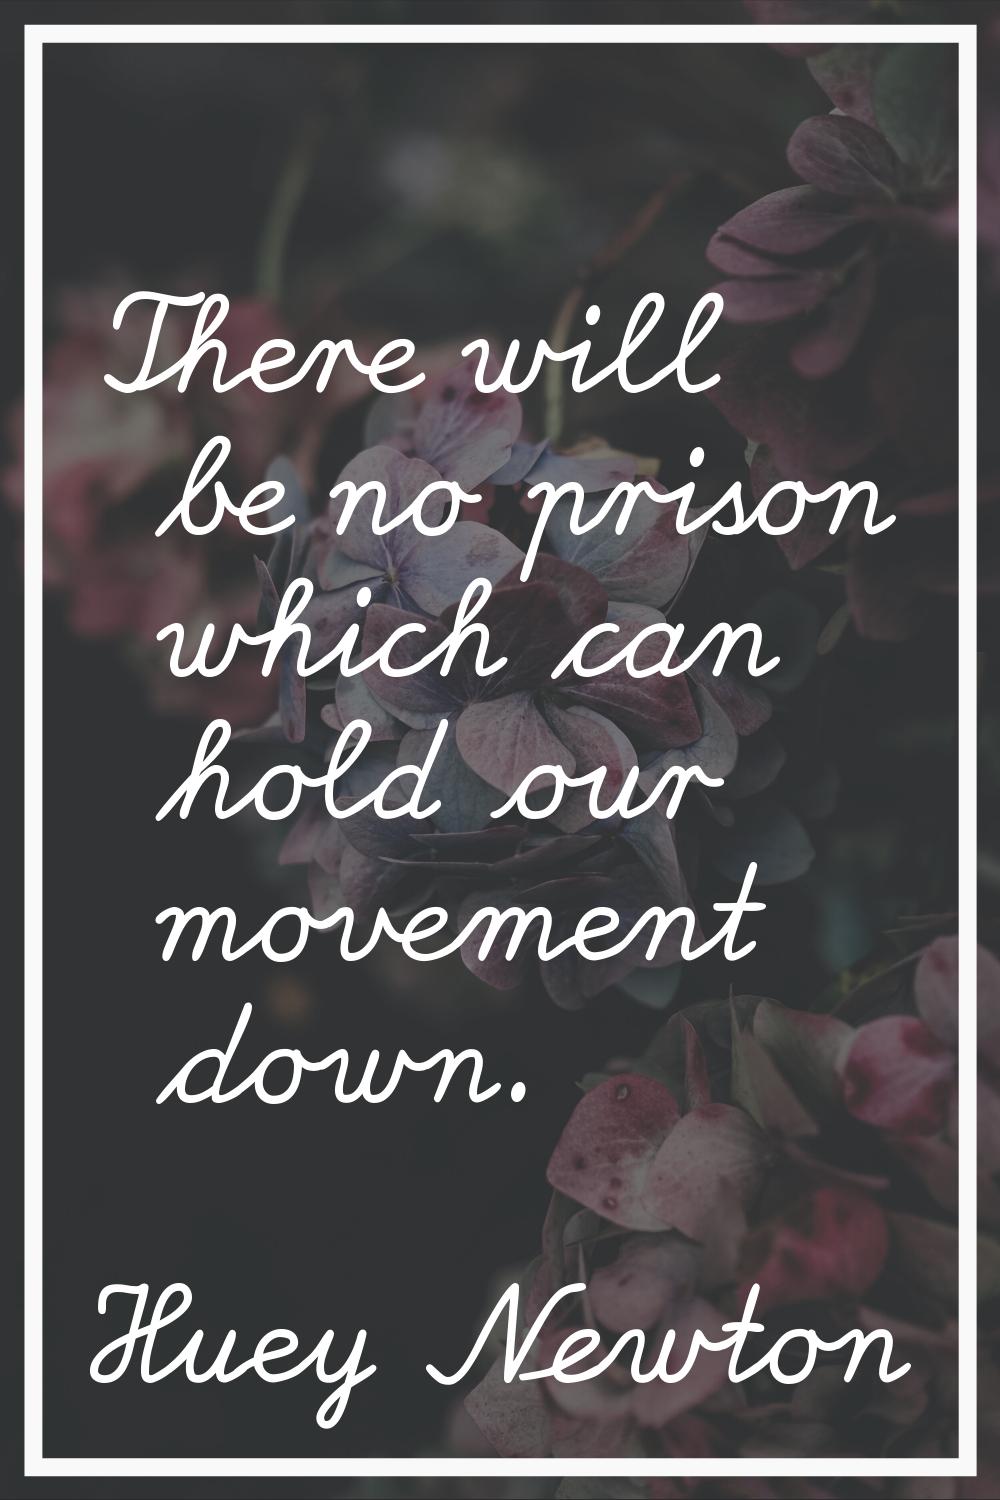 There will be no prison which can hold our movement down.